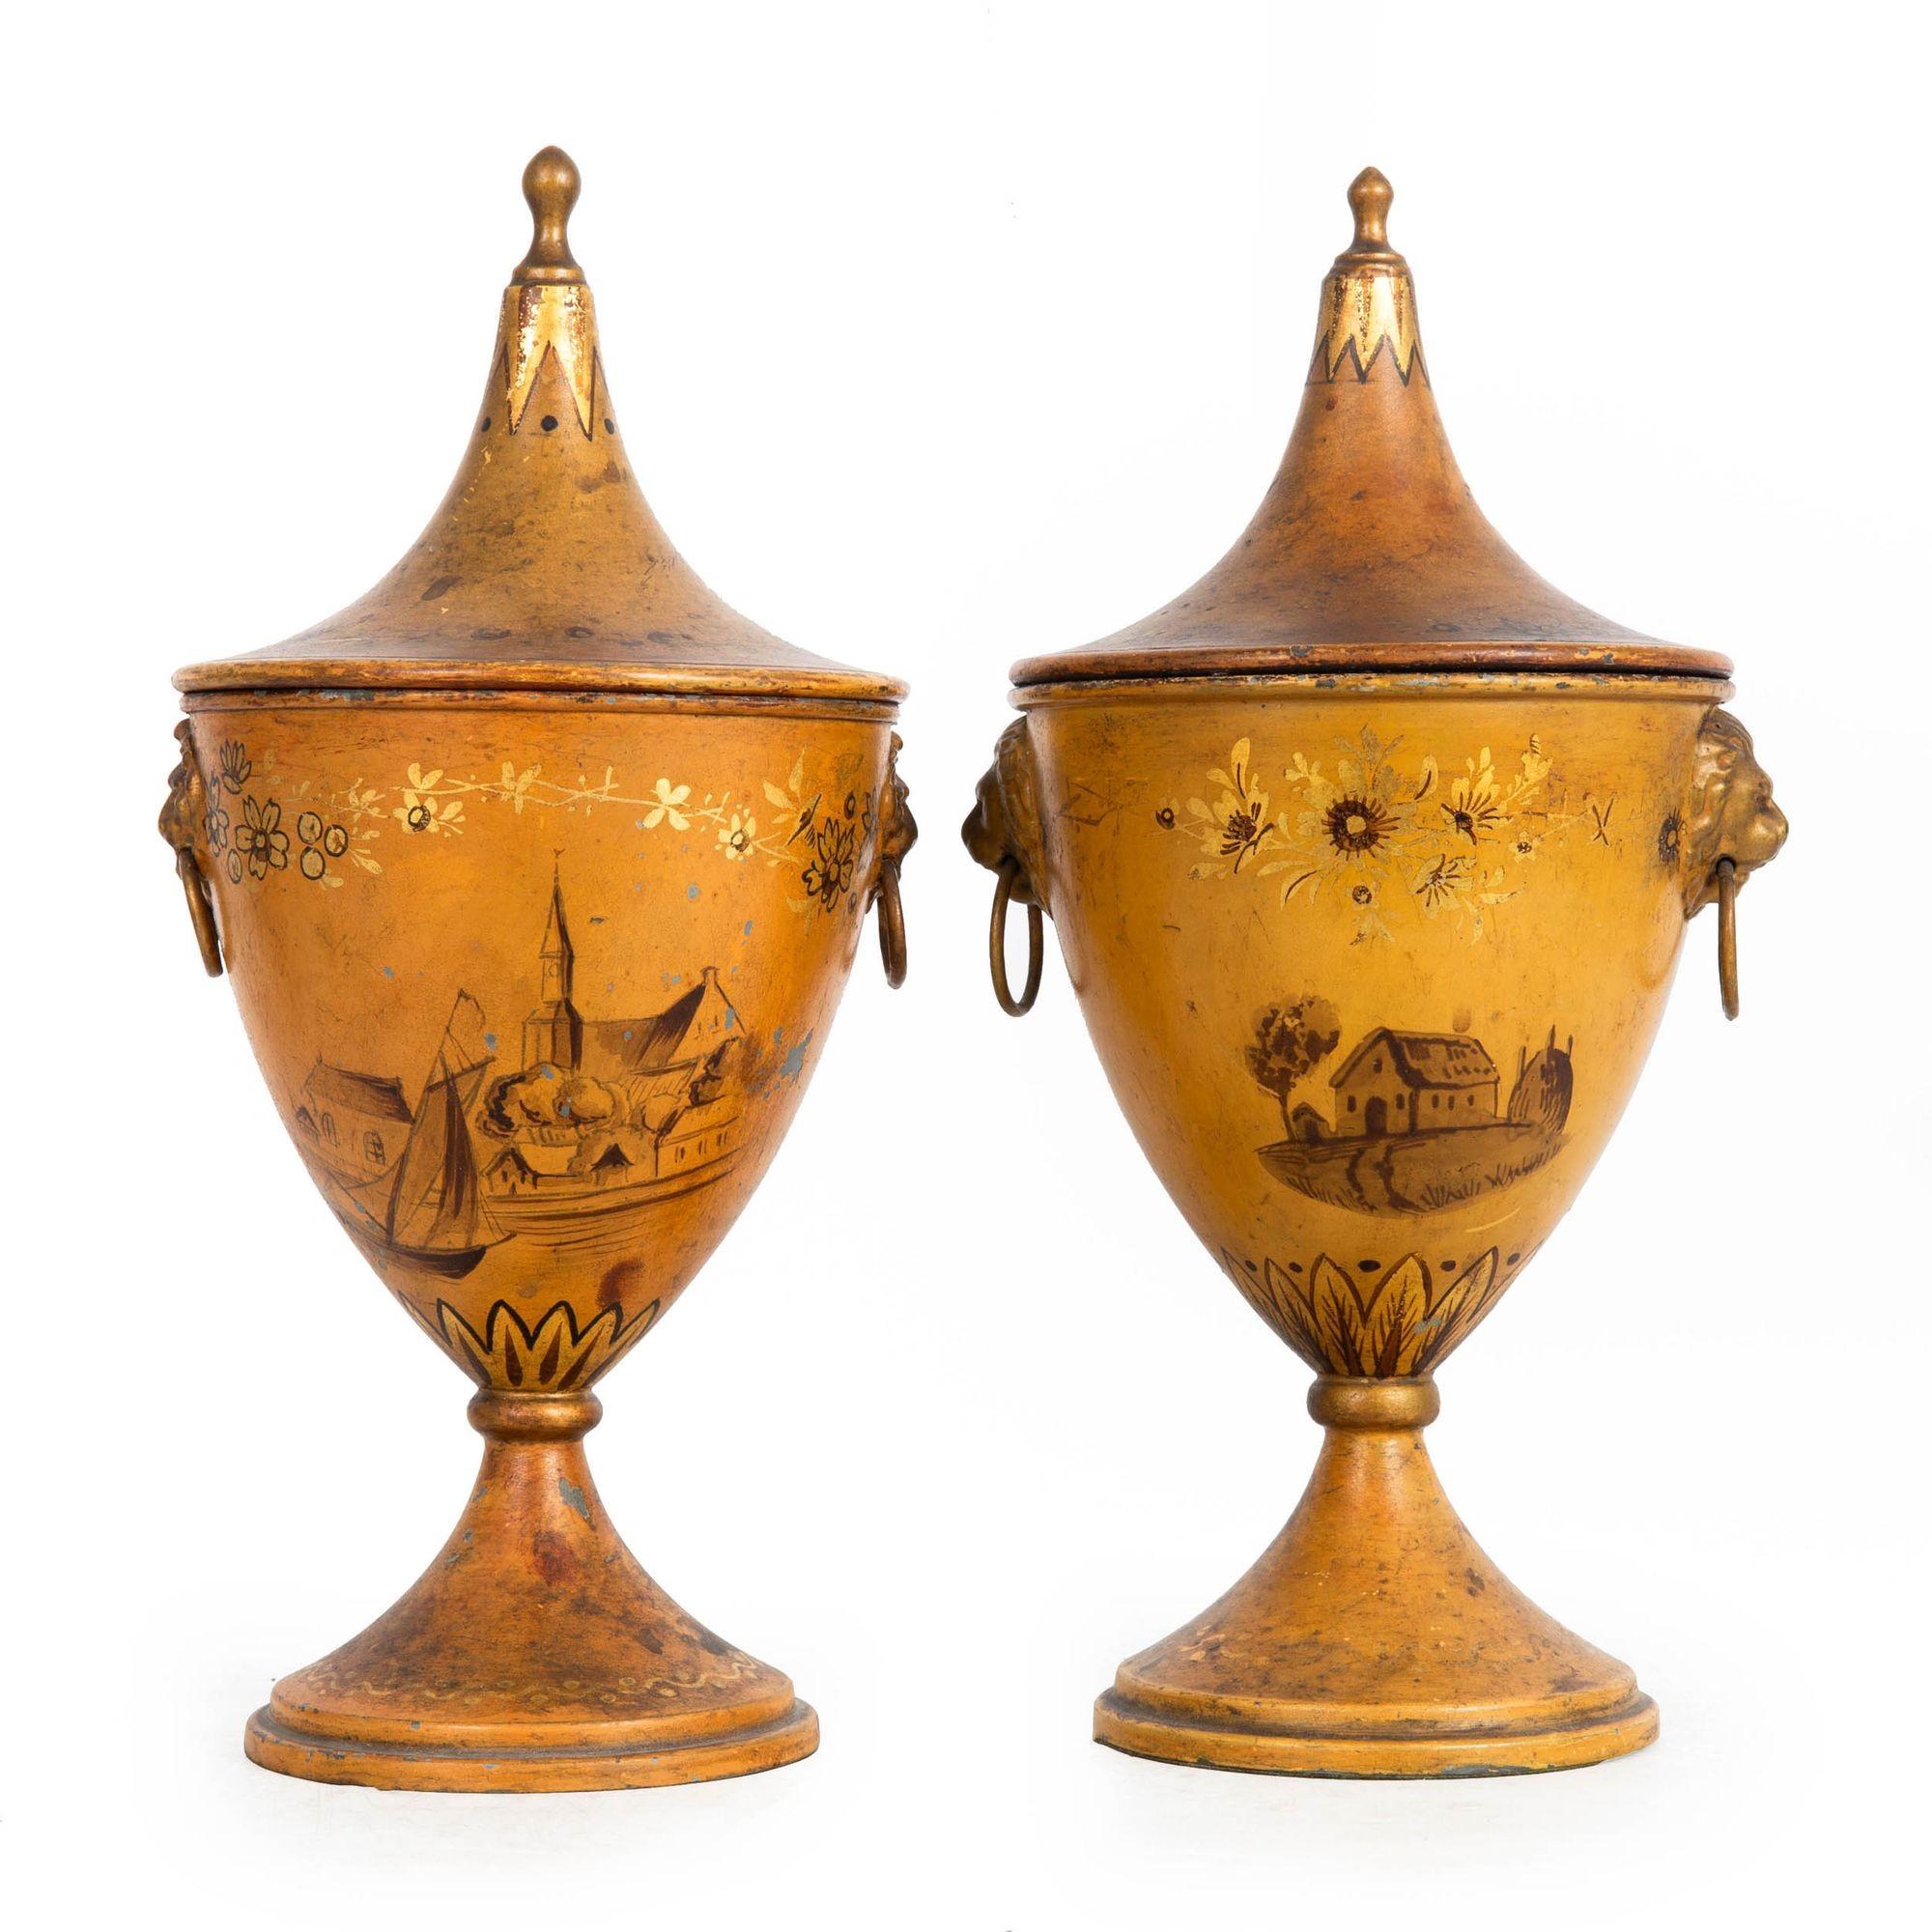 A FINE NEAR-PAIR OF REGENCY TOLE-PAINTED CHESTNUT URNS WITH LION MASKS
Probably Dutch, ca. first half of the 19th century
Item # 402YTP08P

An incredibly beautiful pair of chestnut urns from the Regency era, these are a 